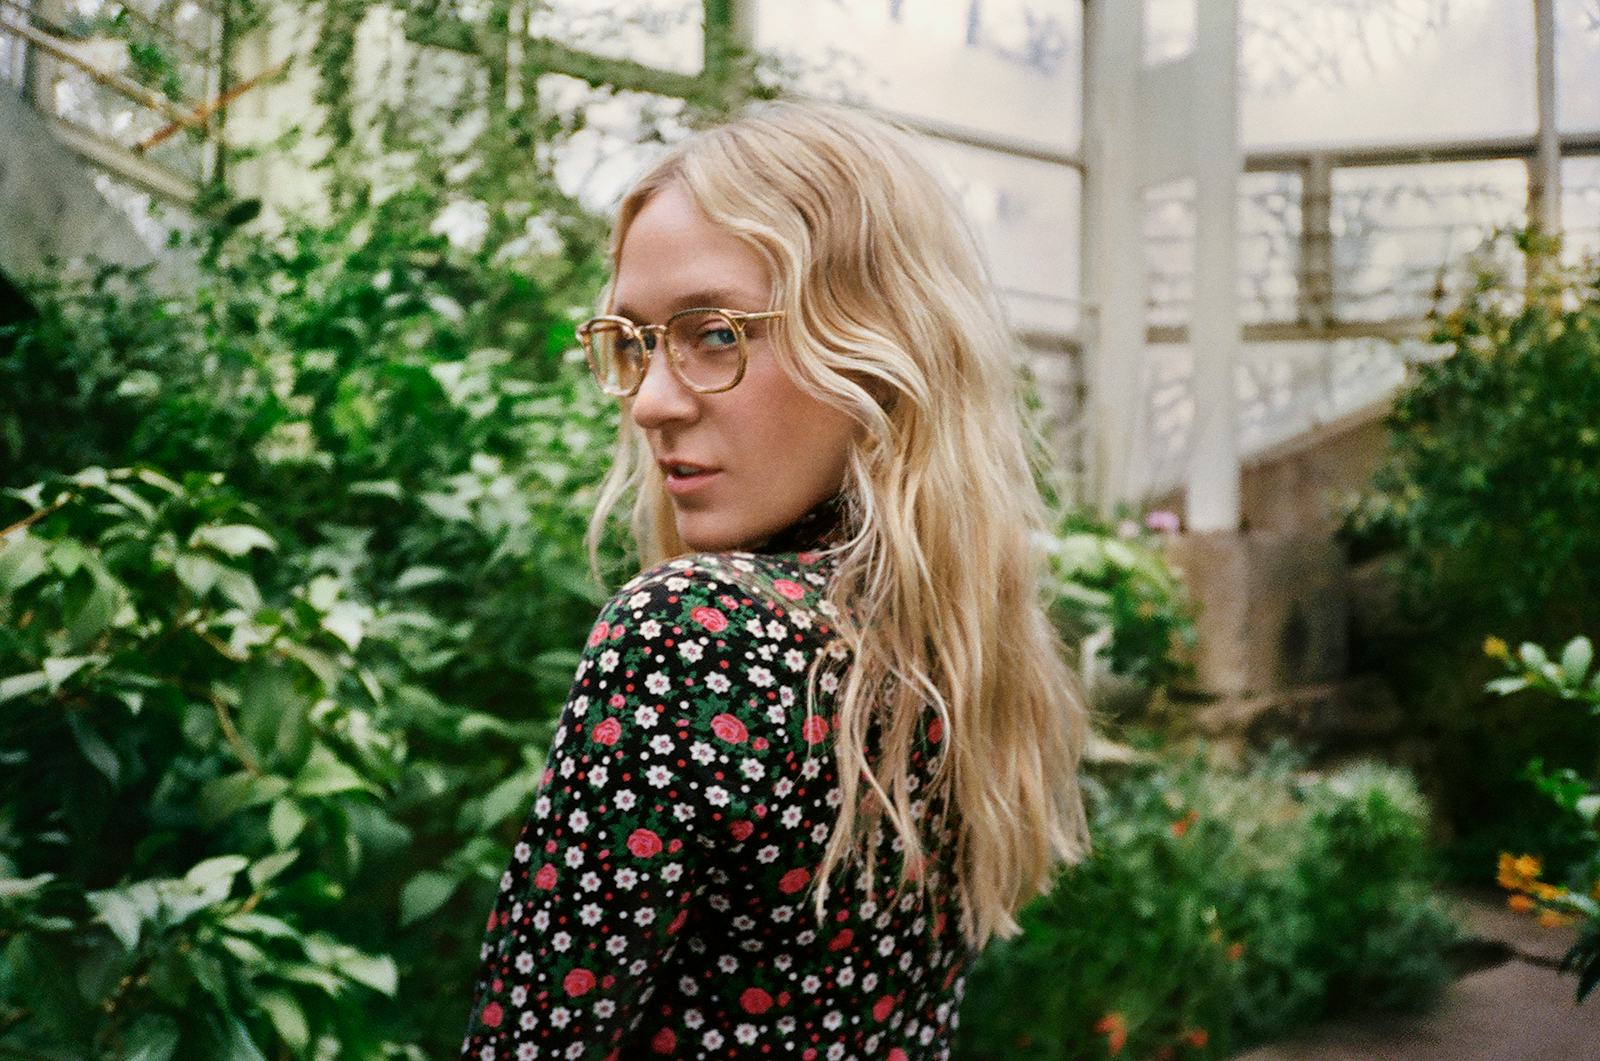 Warby Parker S Chloe Sevigny Collab Is Back With New Glasses Inspired By The Sold Out Design